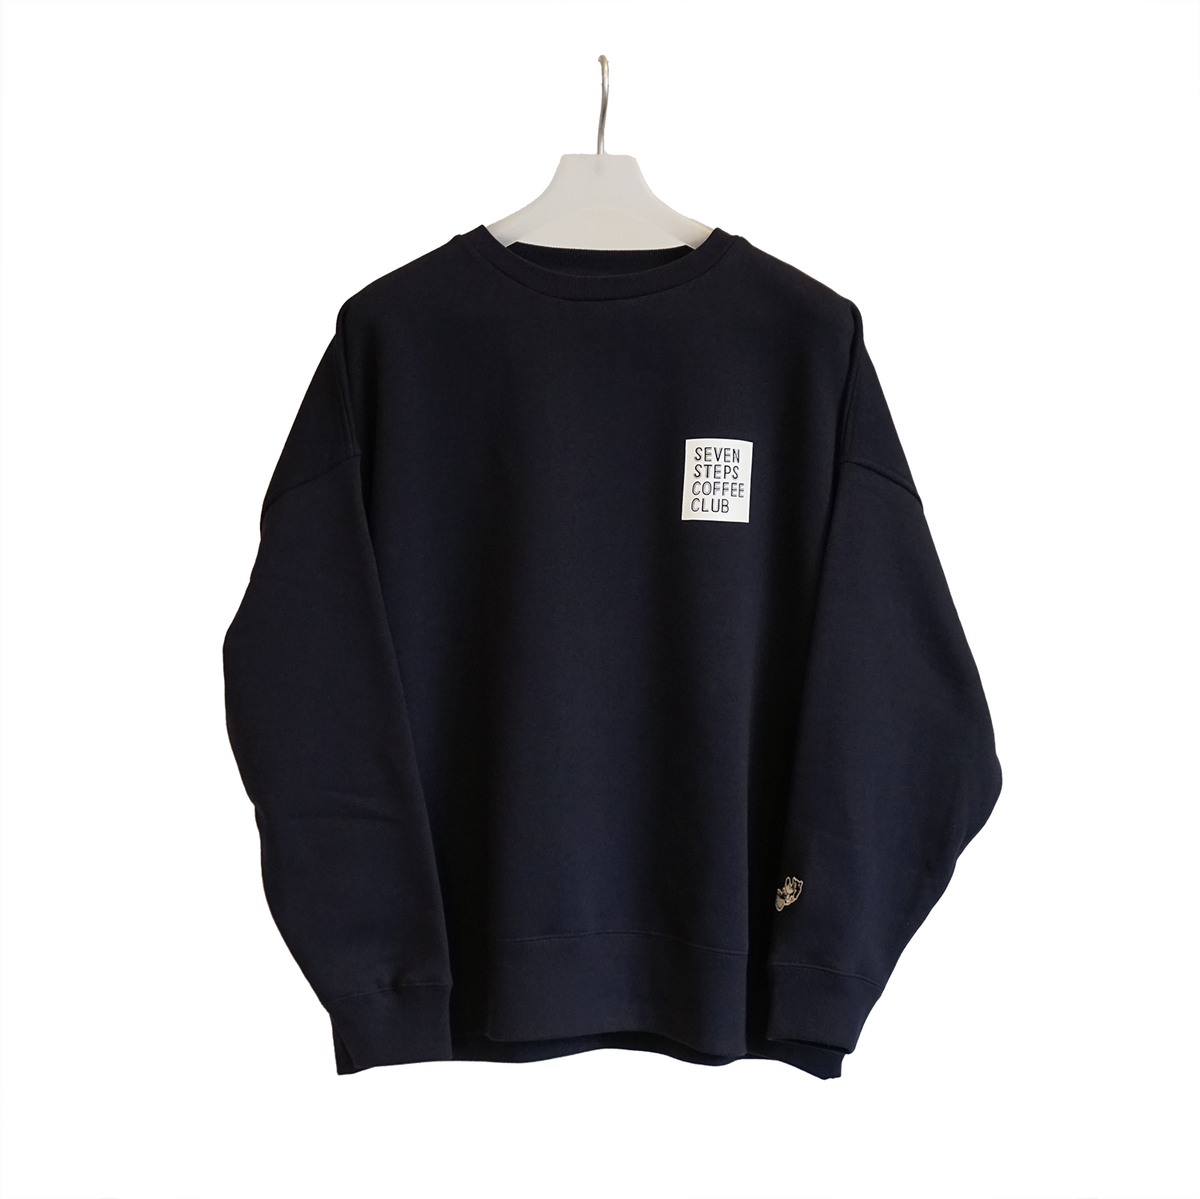 LOVERS HOUSE スウェット L NAVY-